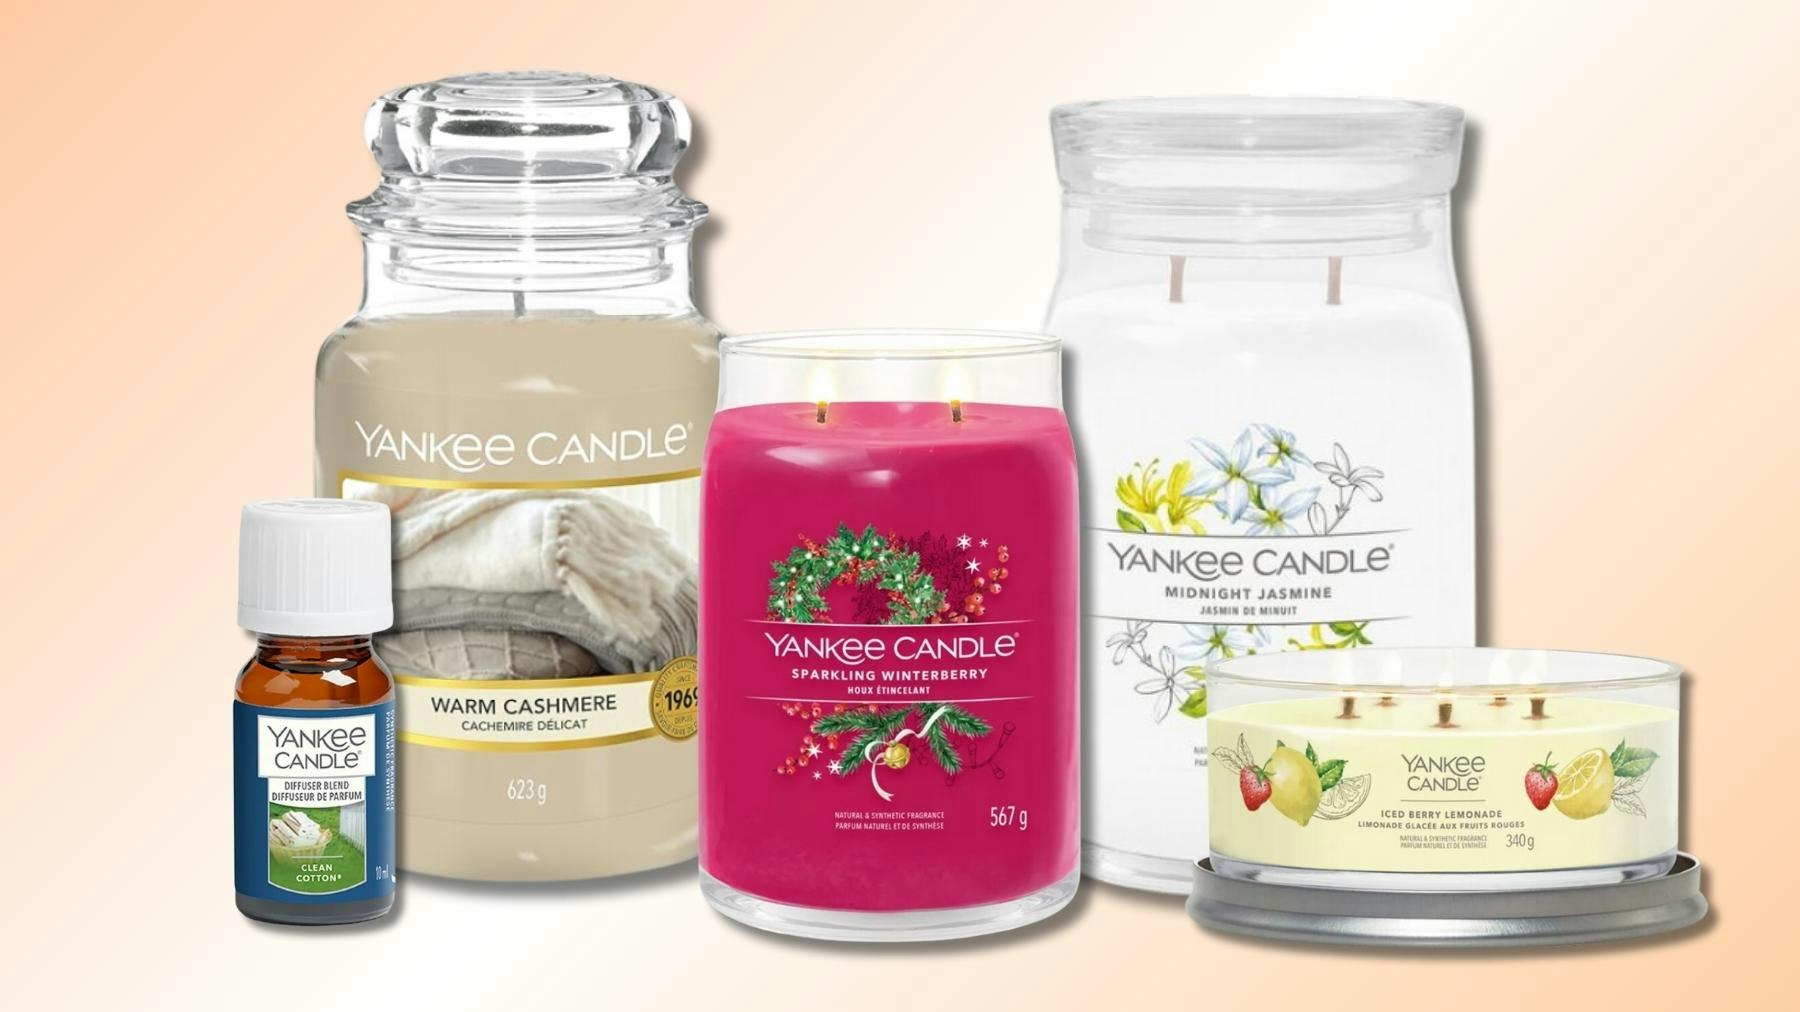 Large Yankee Candles on sale for Cyber Monday 2021